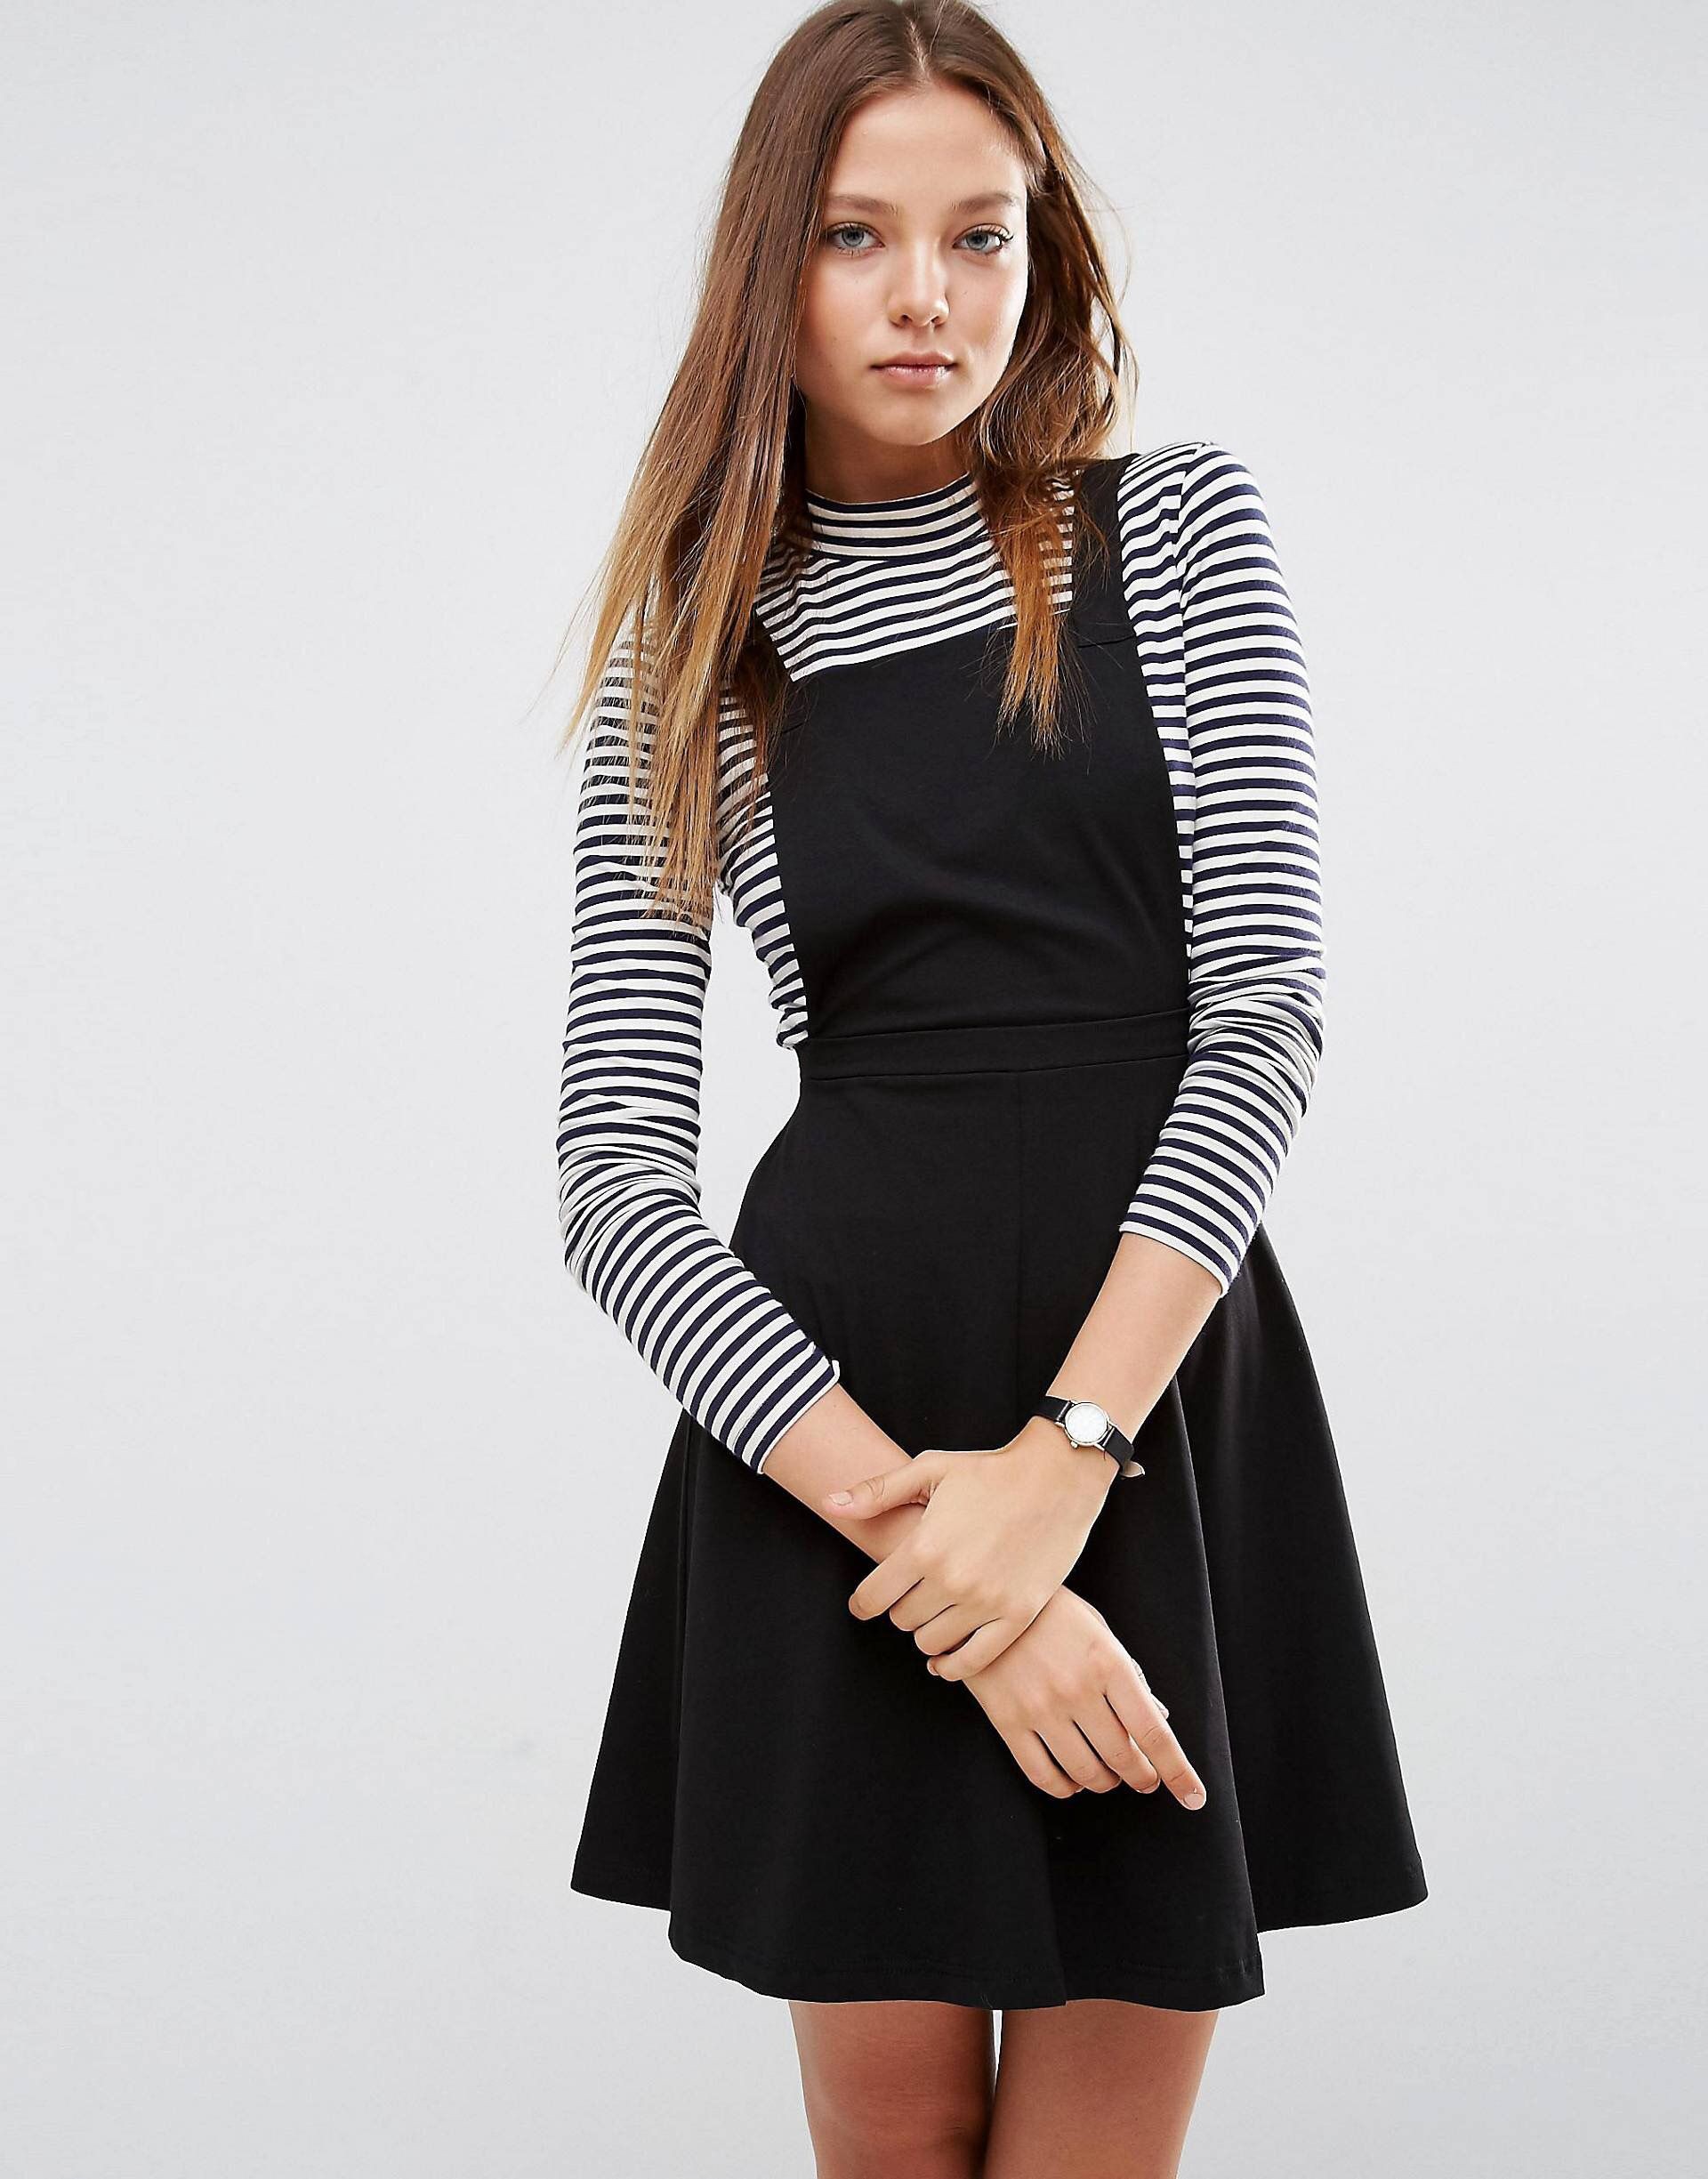 Dress with striped shirt underneath